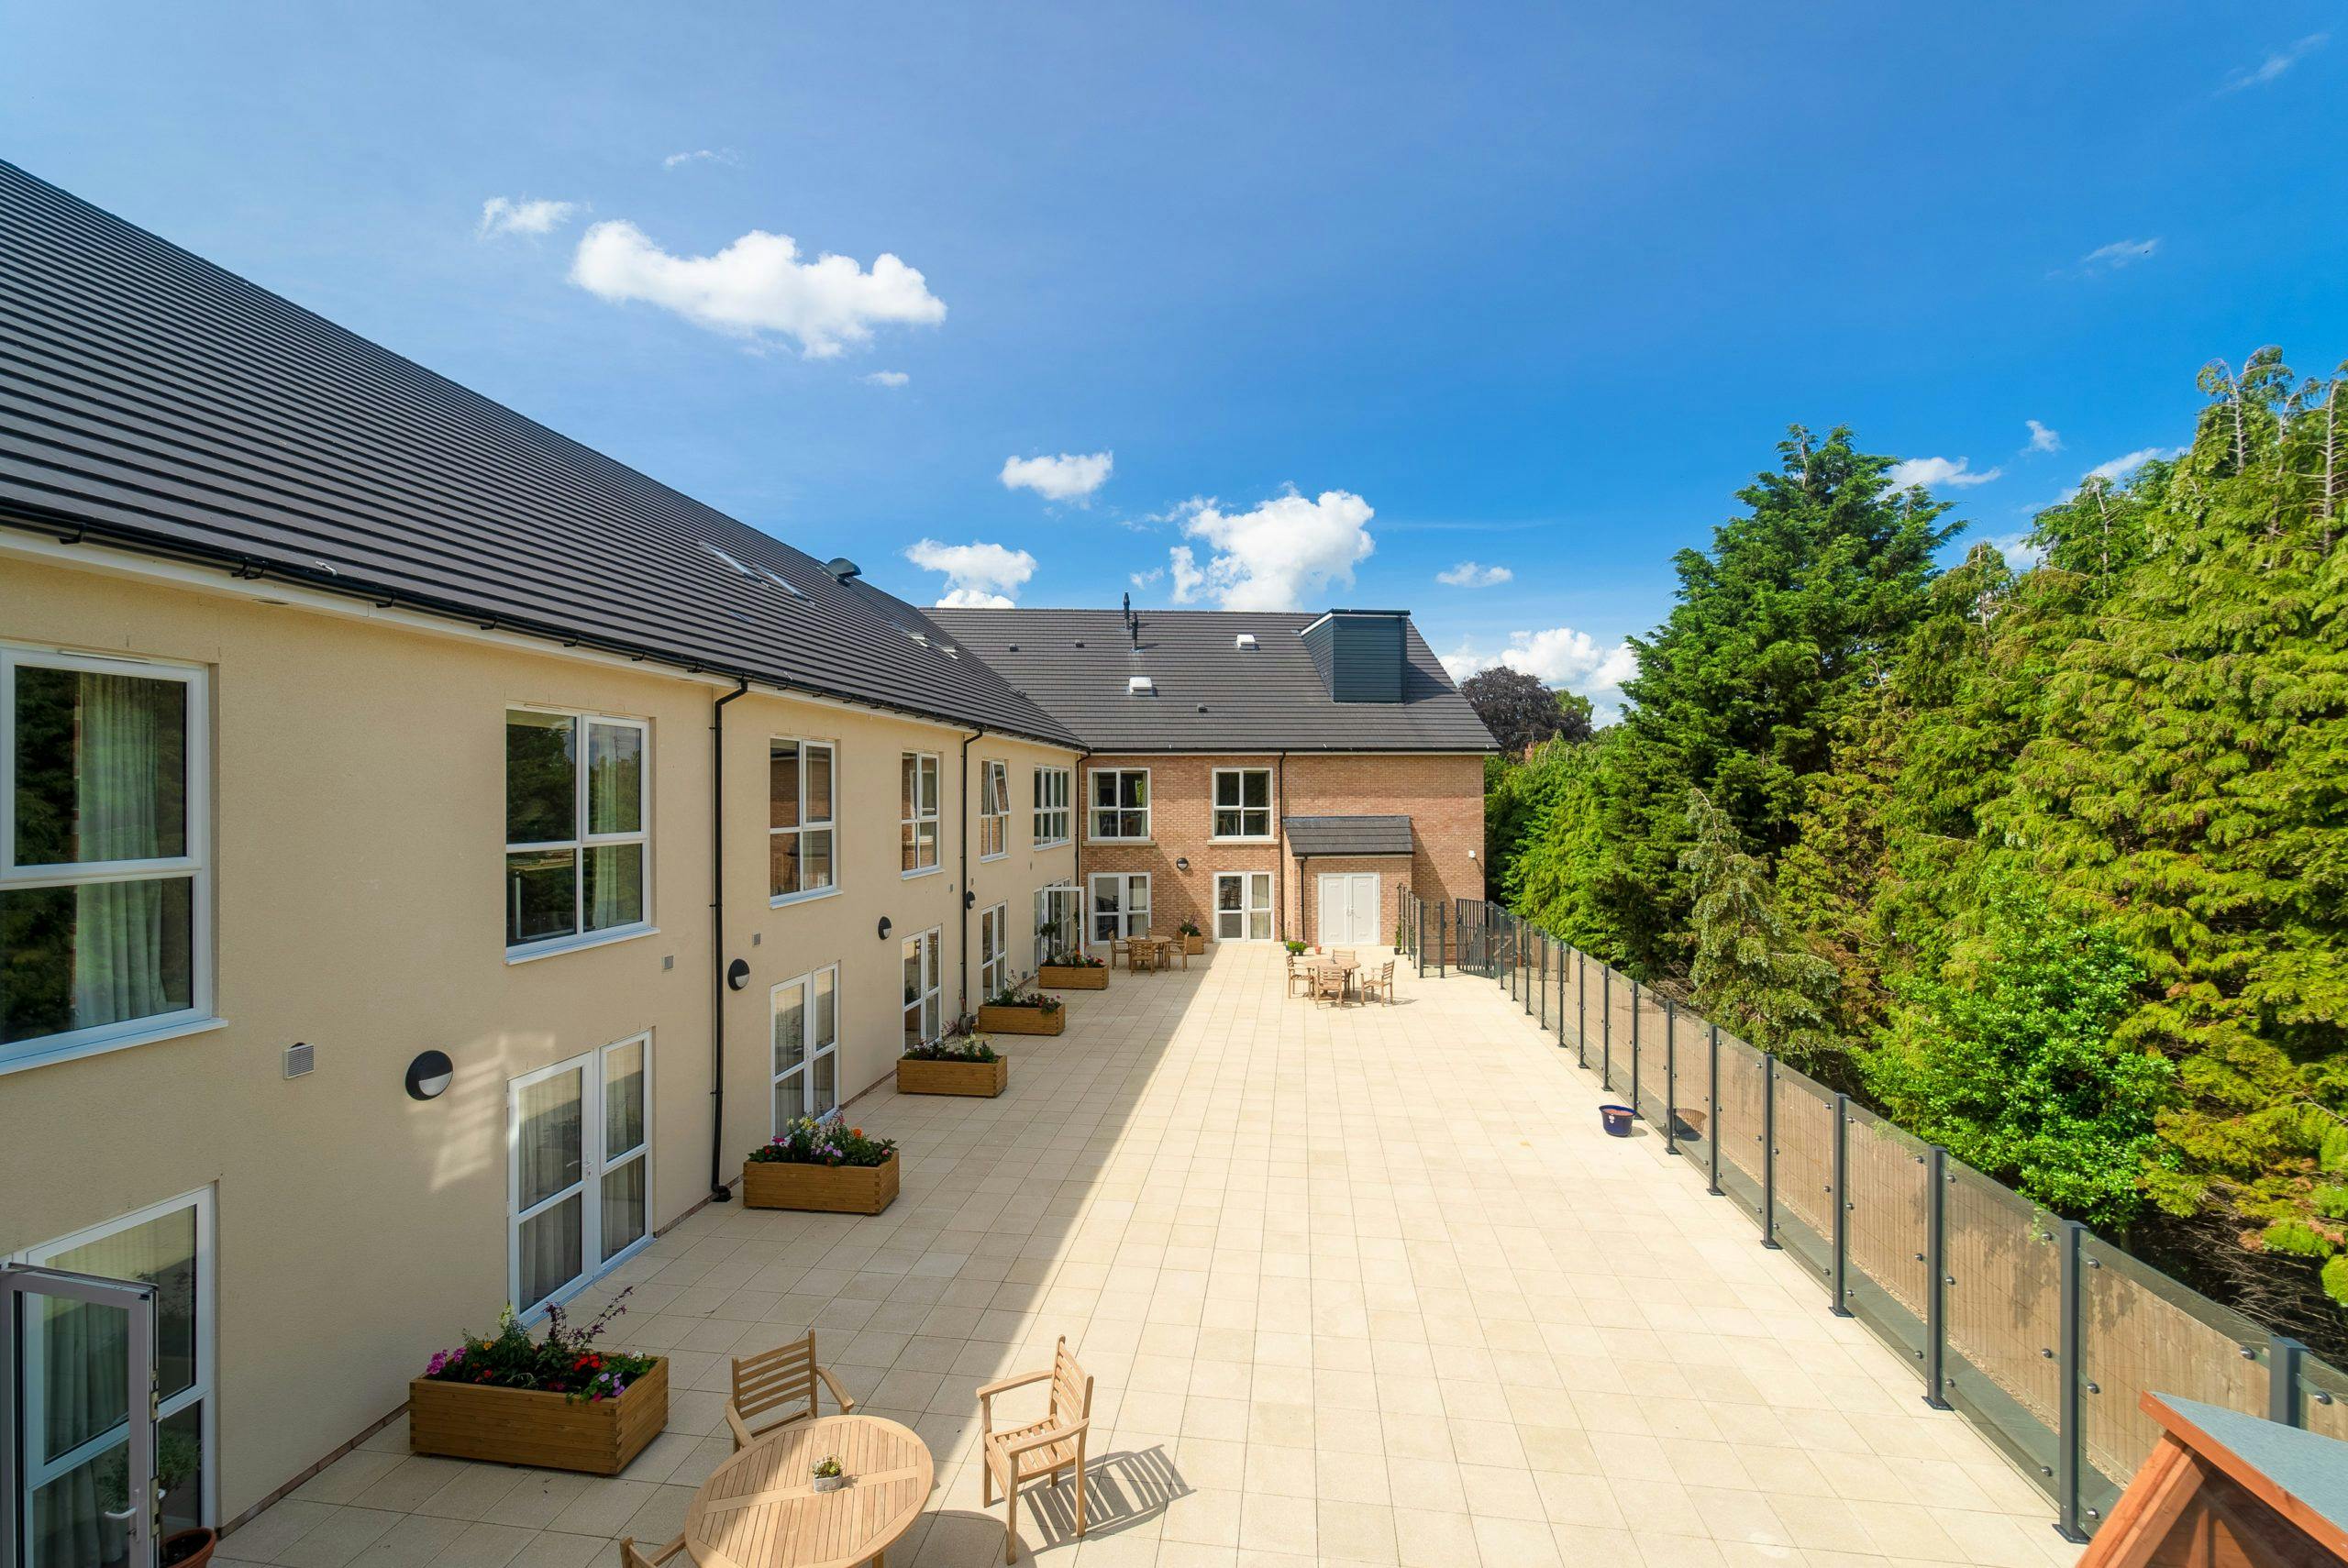 Terrace of Halmer Court care home in Spalding, Lincolshire